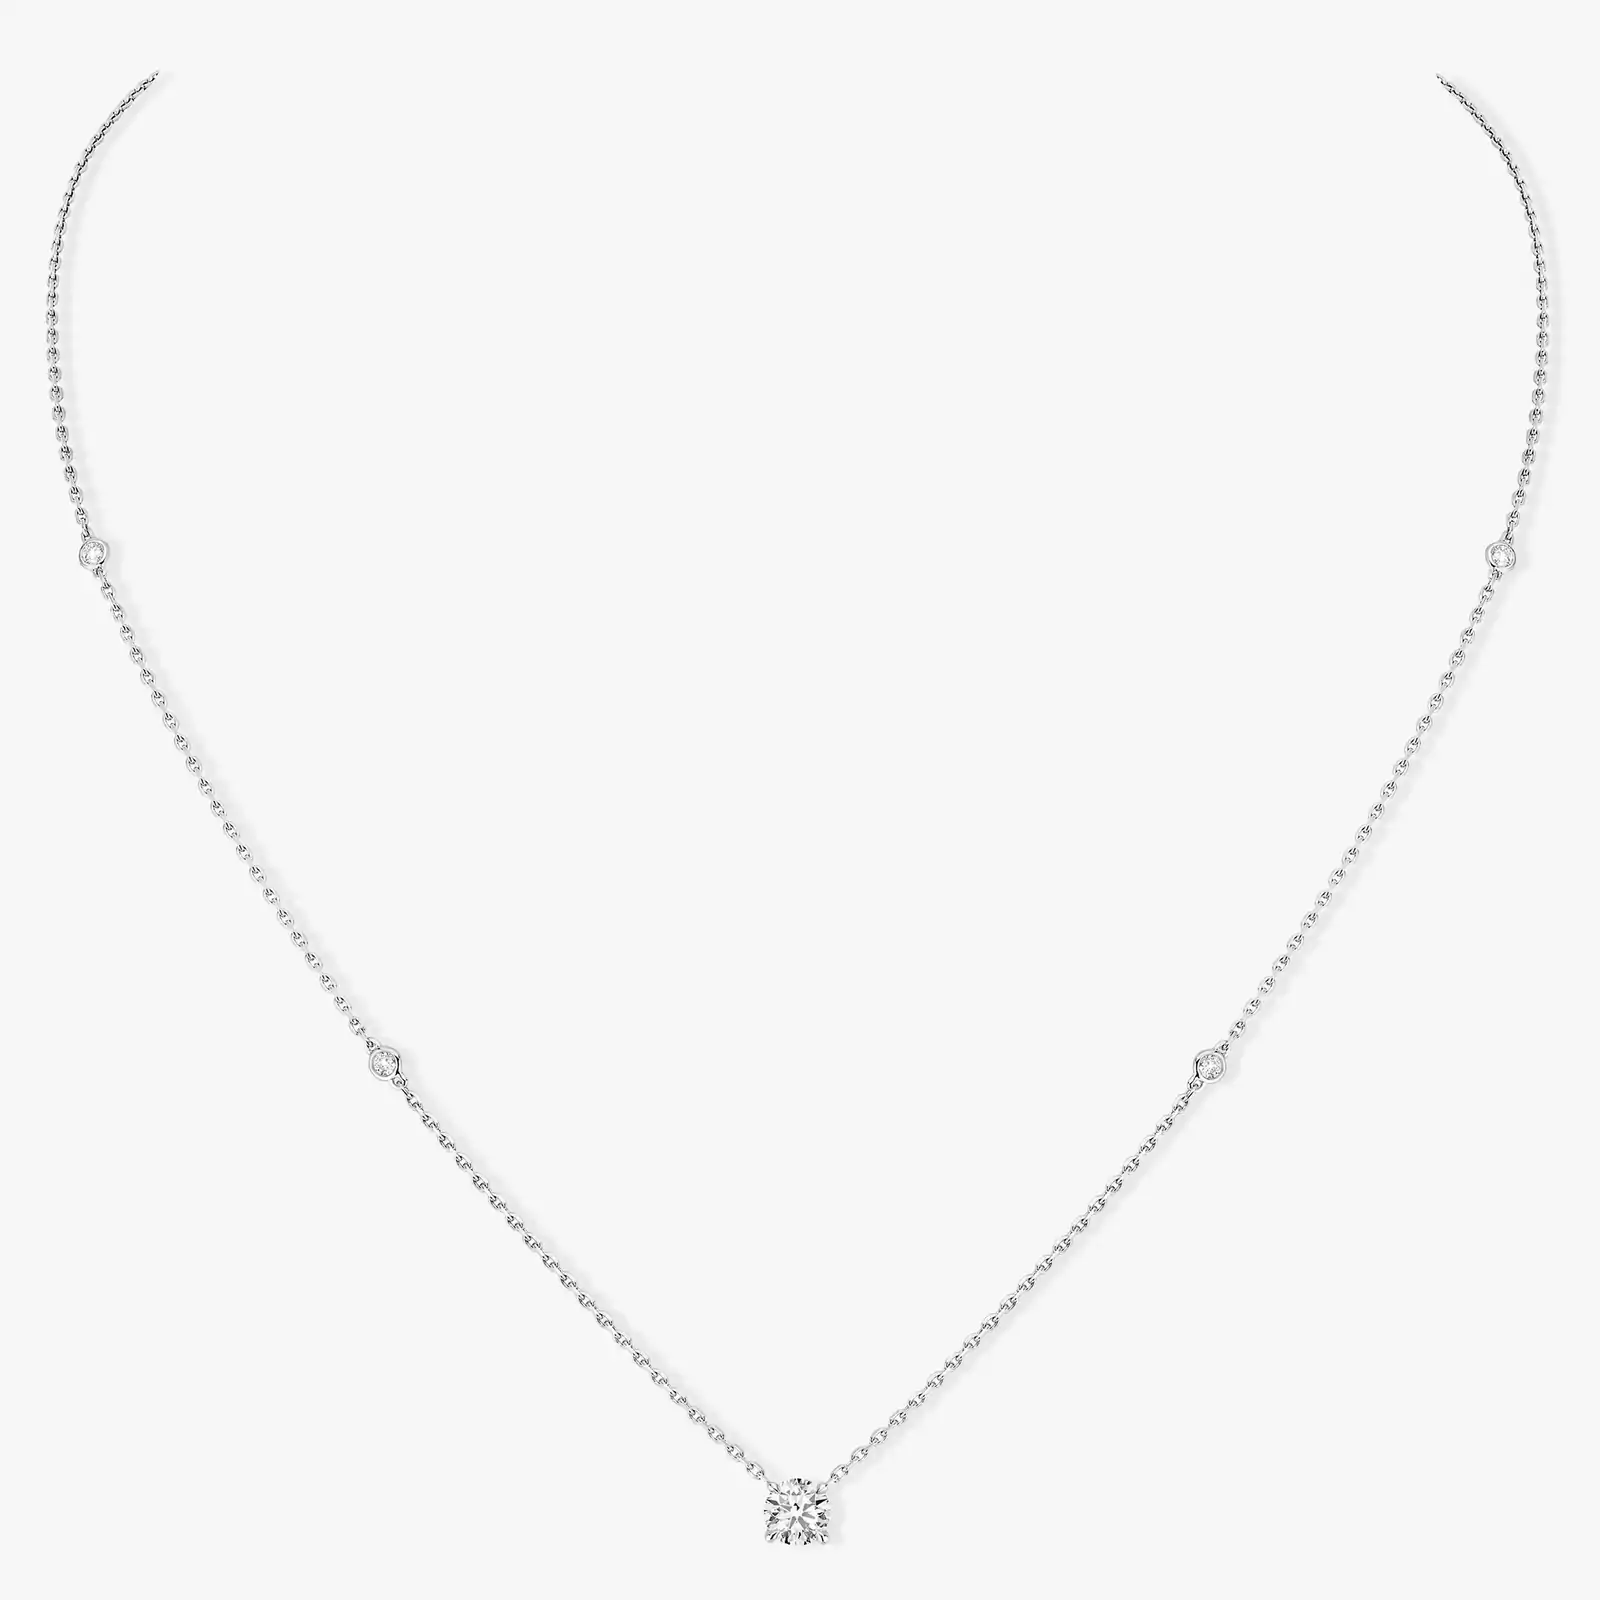 Solitaire Brilliant Cut  White Gold For Her Diamond Necklace 08571-WG